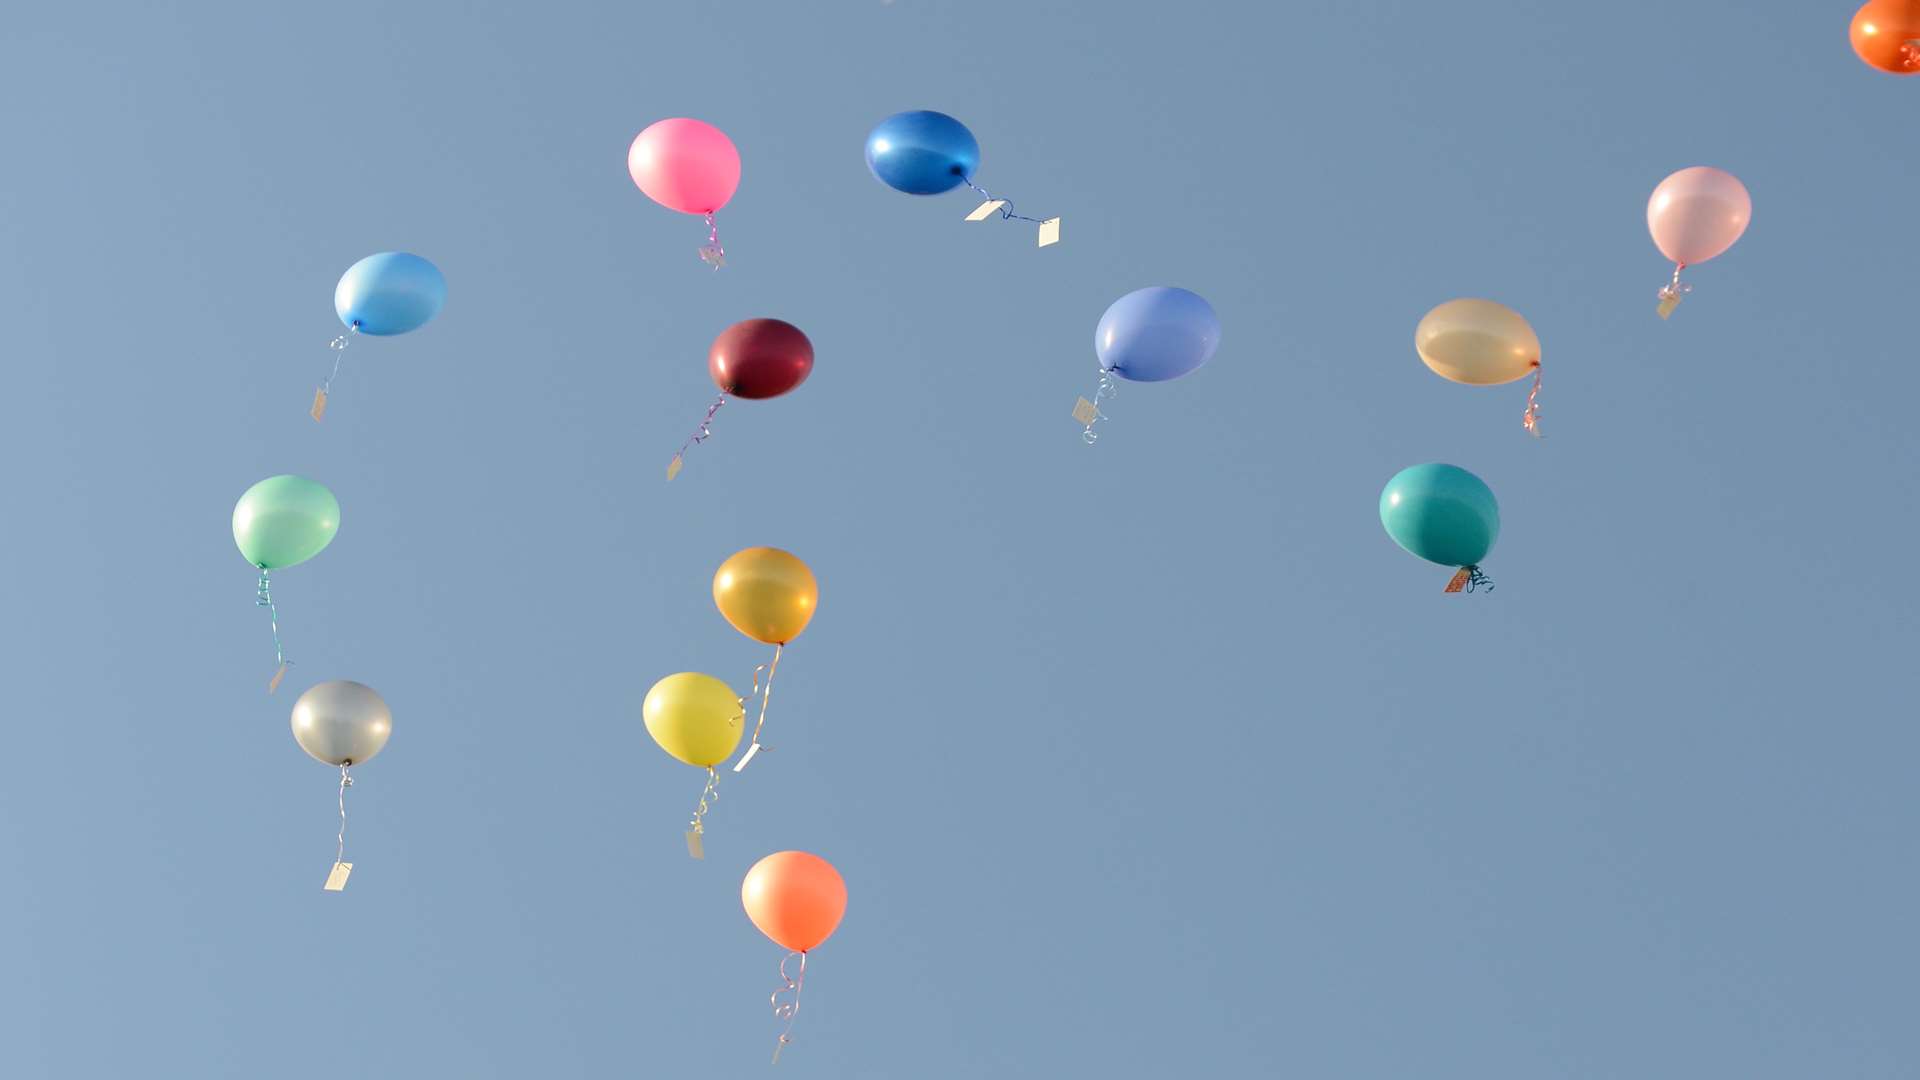 Canterbury has banned the release of balloons and lanterns after complaints